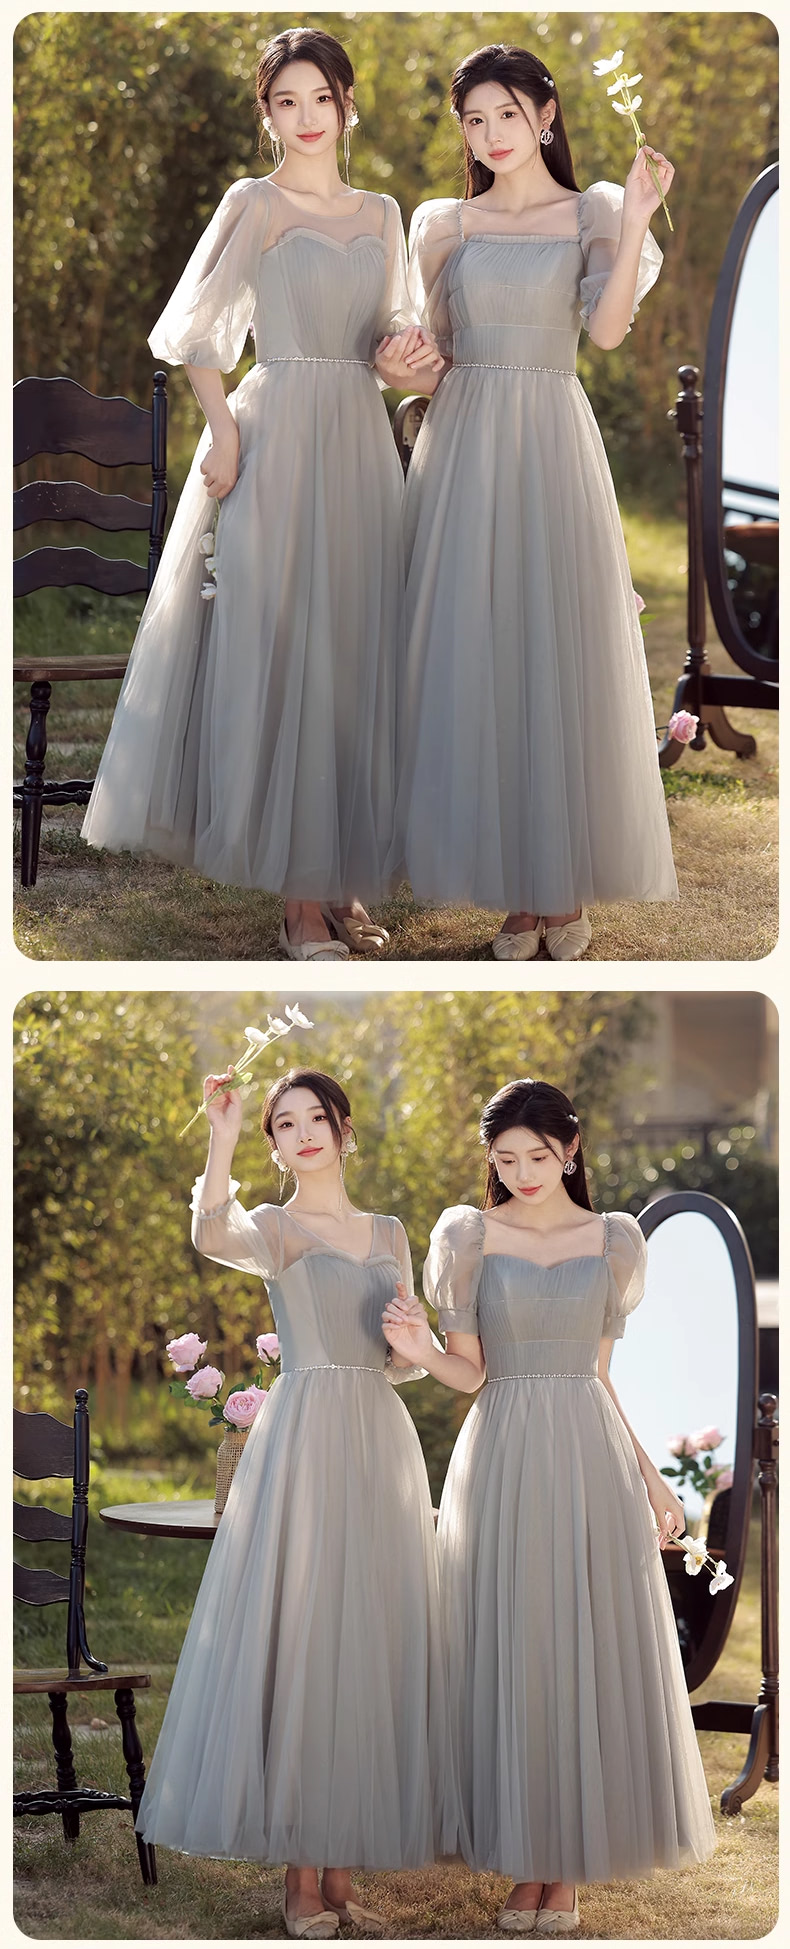 Trendy-Simple-Gray-Tulle-Long-Summer-Bridesmaid-Dress-with-Sleeves16